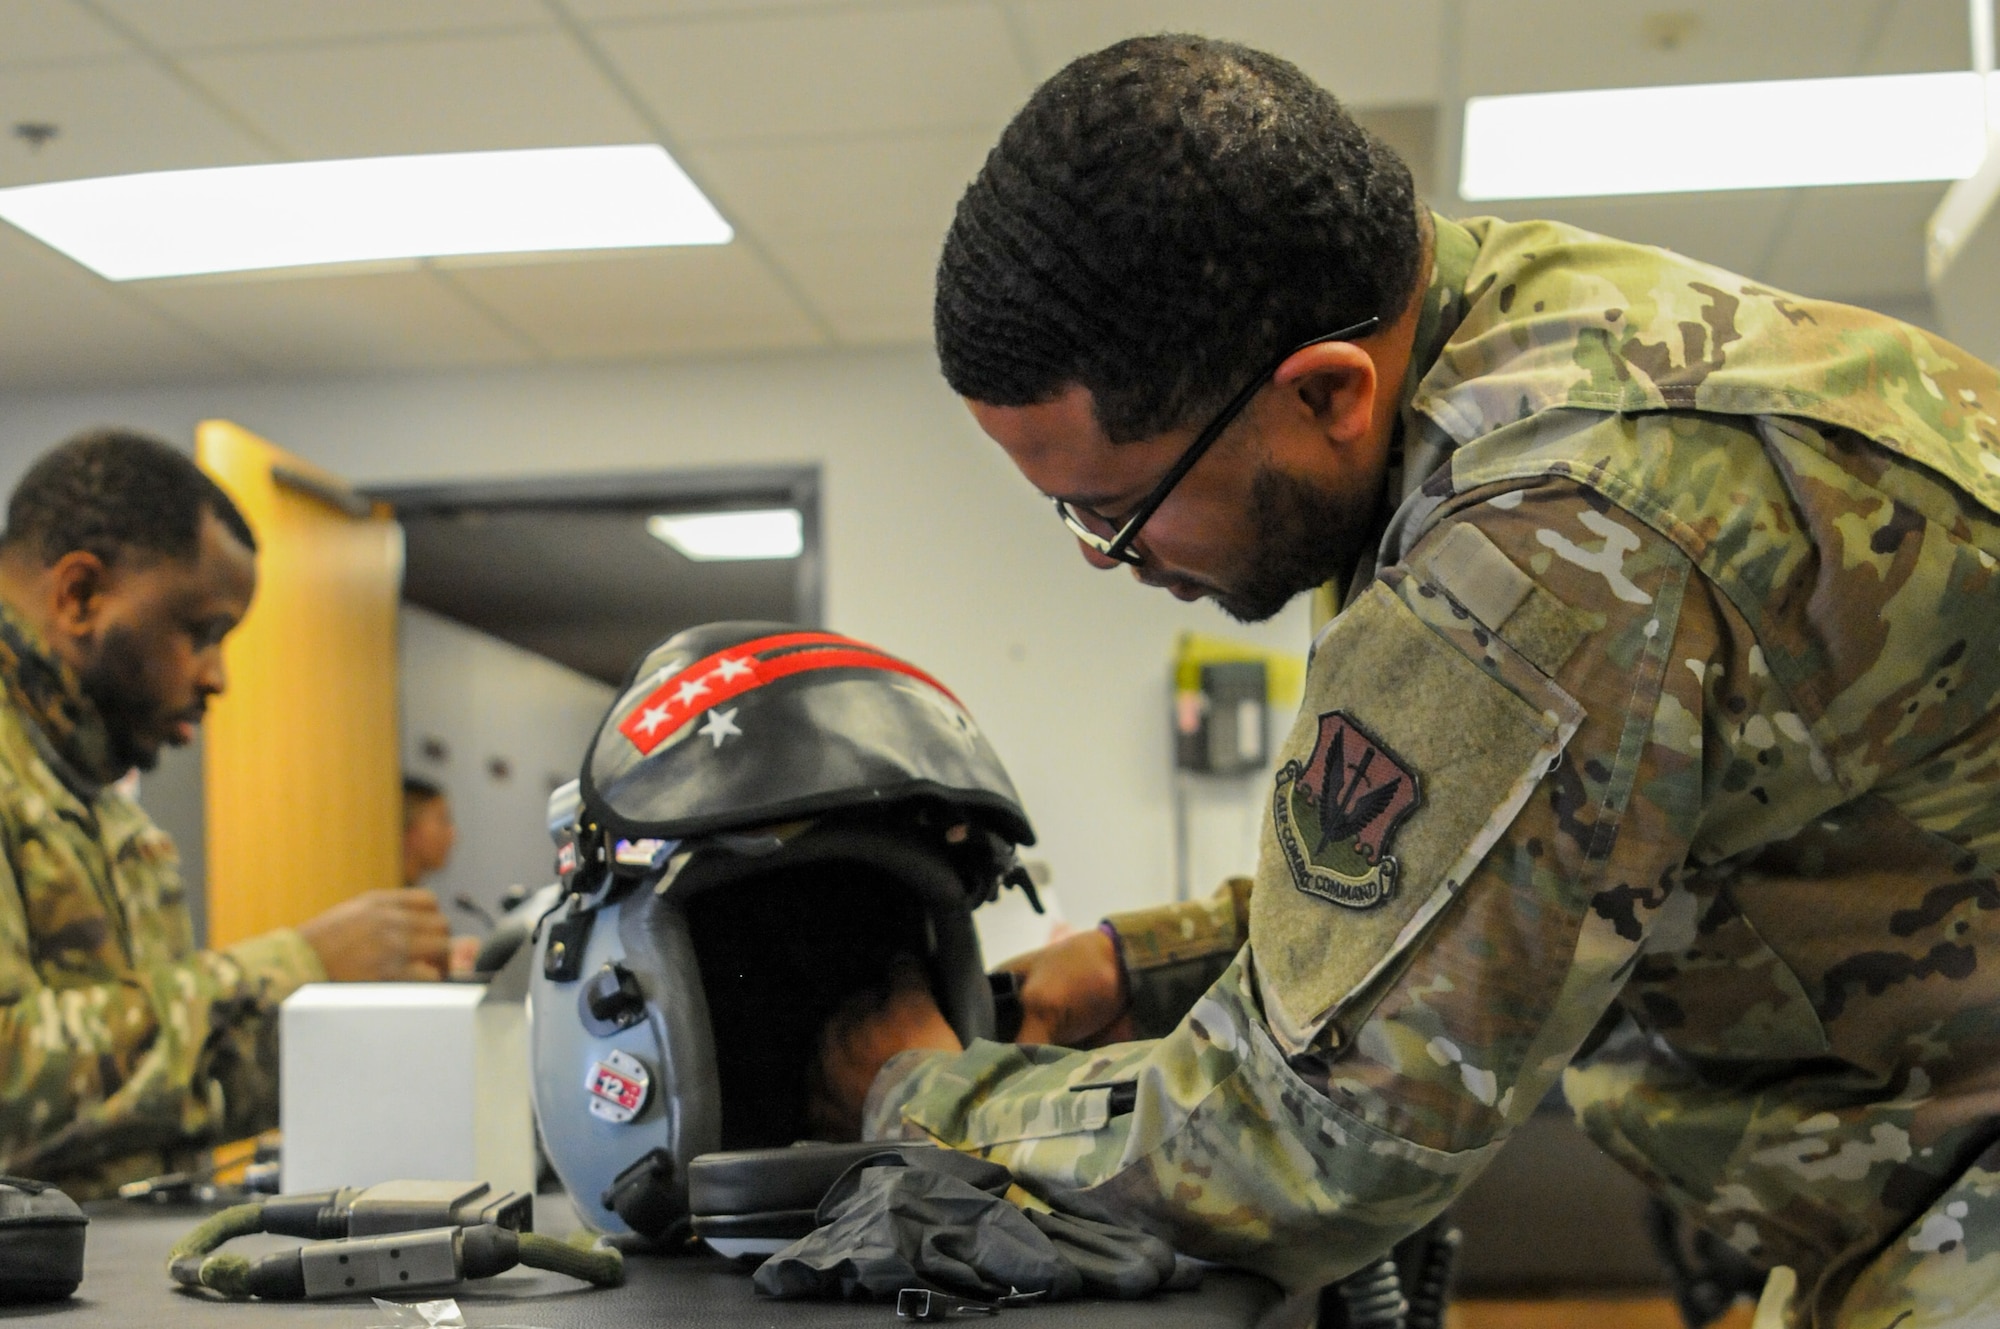 104th Operations Support Flight Airmen install SPYDR in pilot helmets Sept. 18, 2021, at Barnes Air National Guard Base, Massachusetts. The SPYDR system provides an audible warning when a pilot's oxygen saturation drops below a specific threshold, enhancing their safety and tactical capabilities.